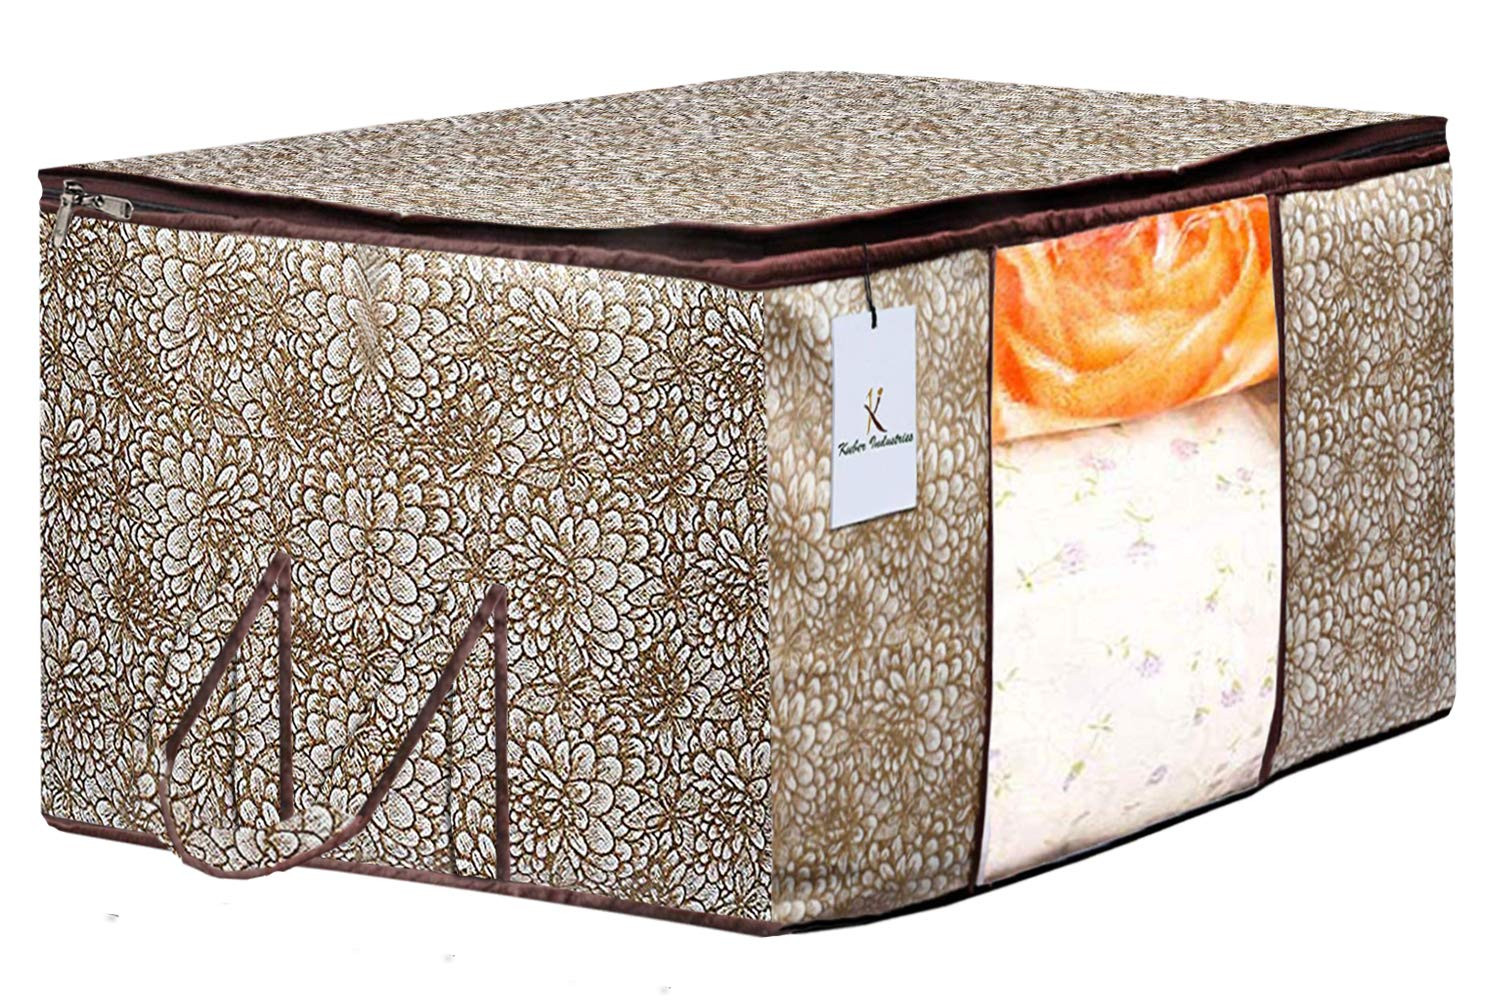 Kuber Industries Metalic Printed Non Woven Saree Cover And Underbed Storage Bag, Storage Organiser, Blanket Cover, Ivory Red & Golden Brown  -CTKTC42375